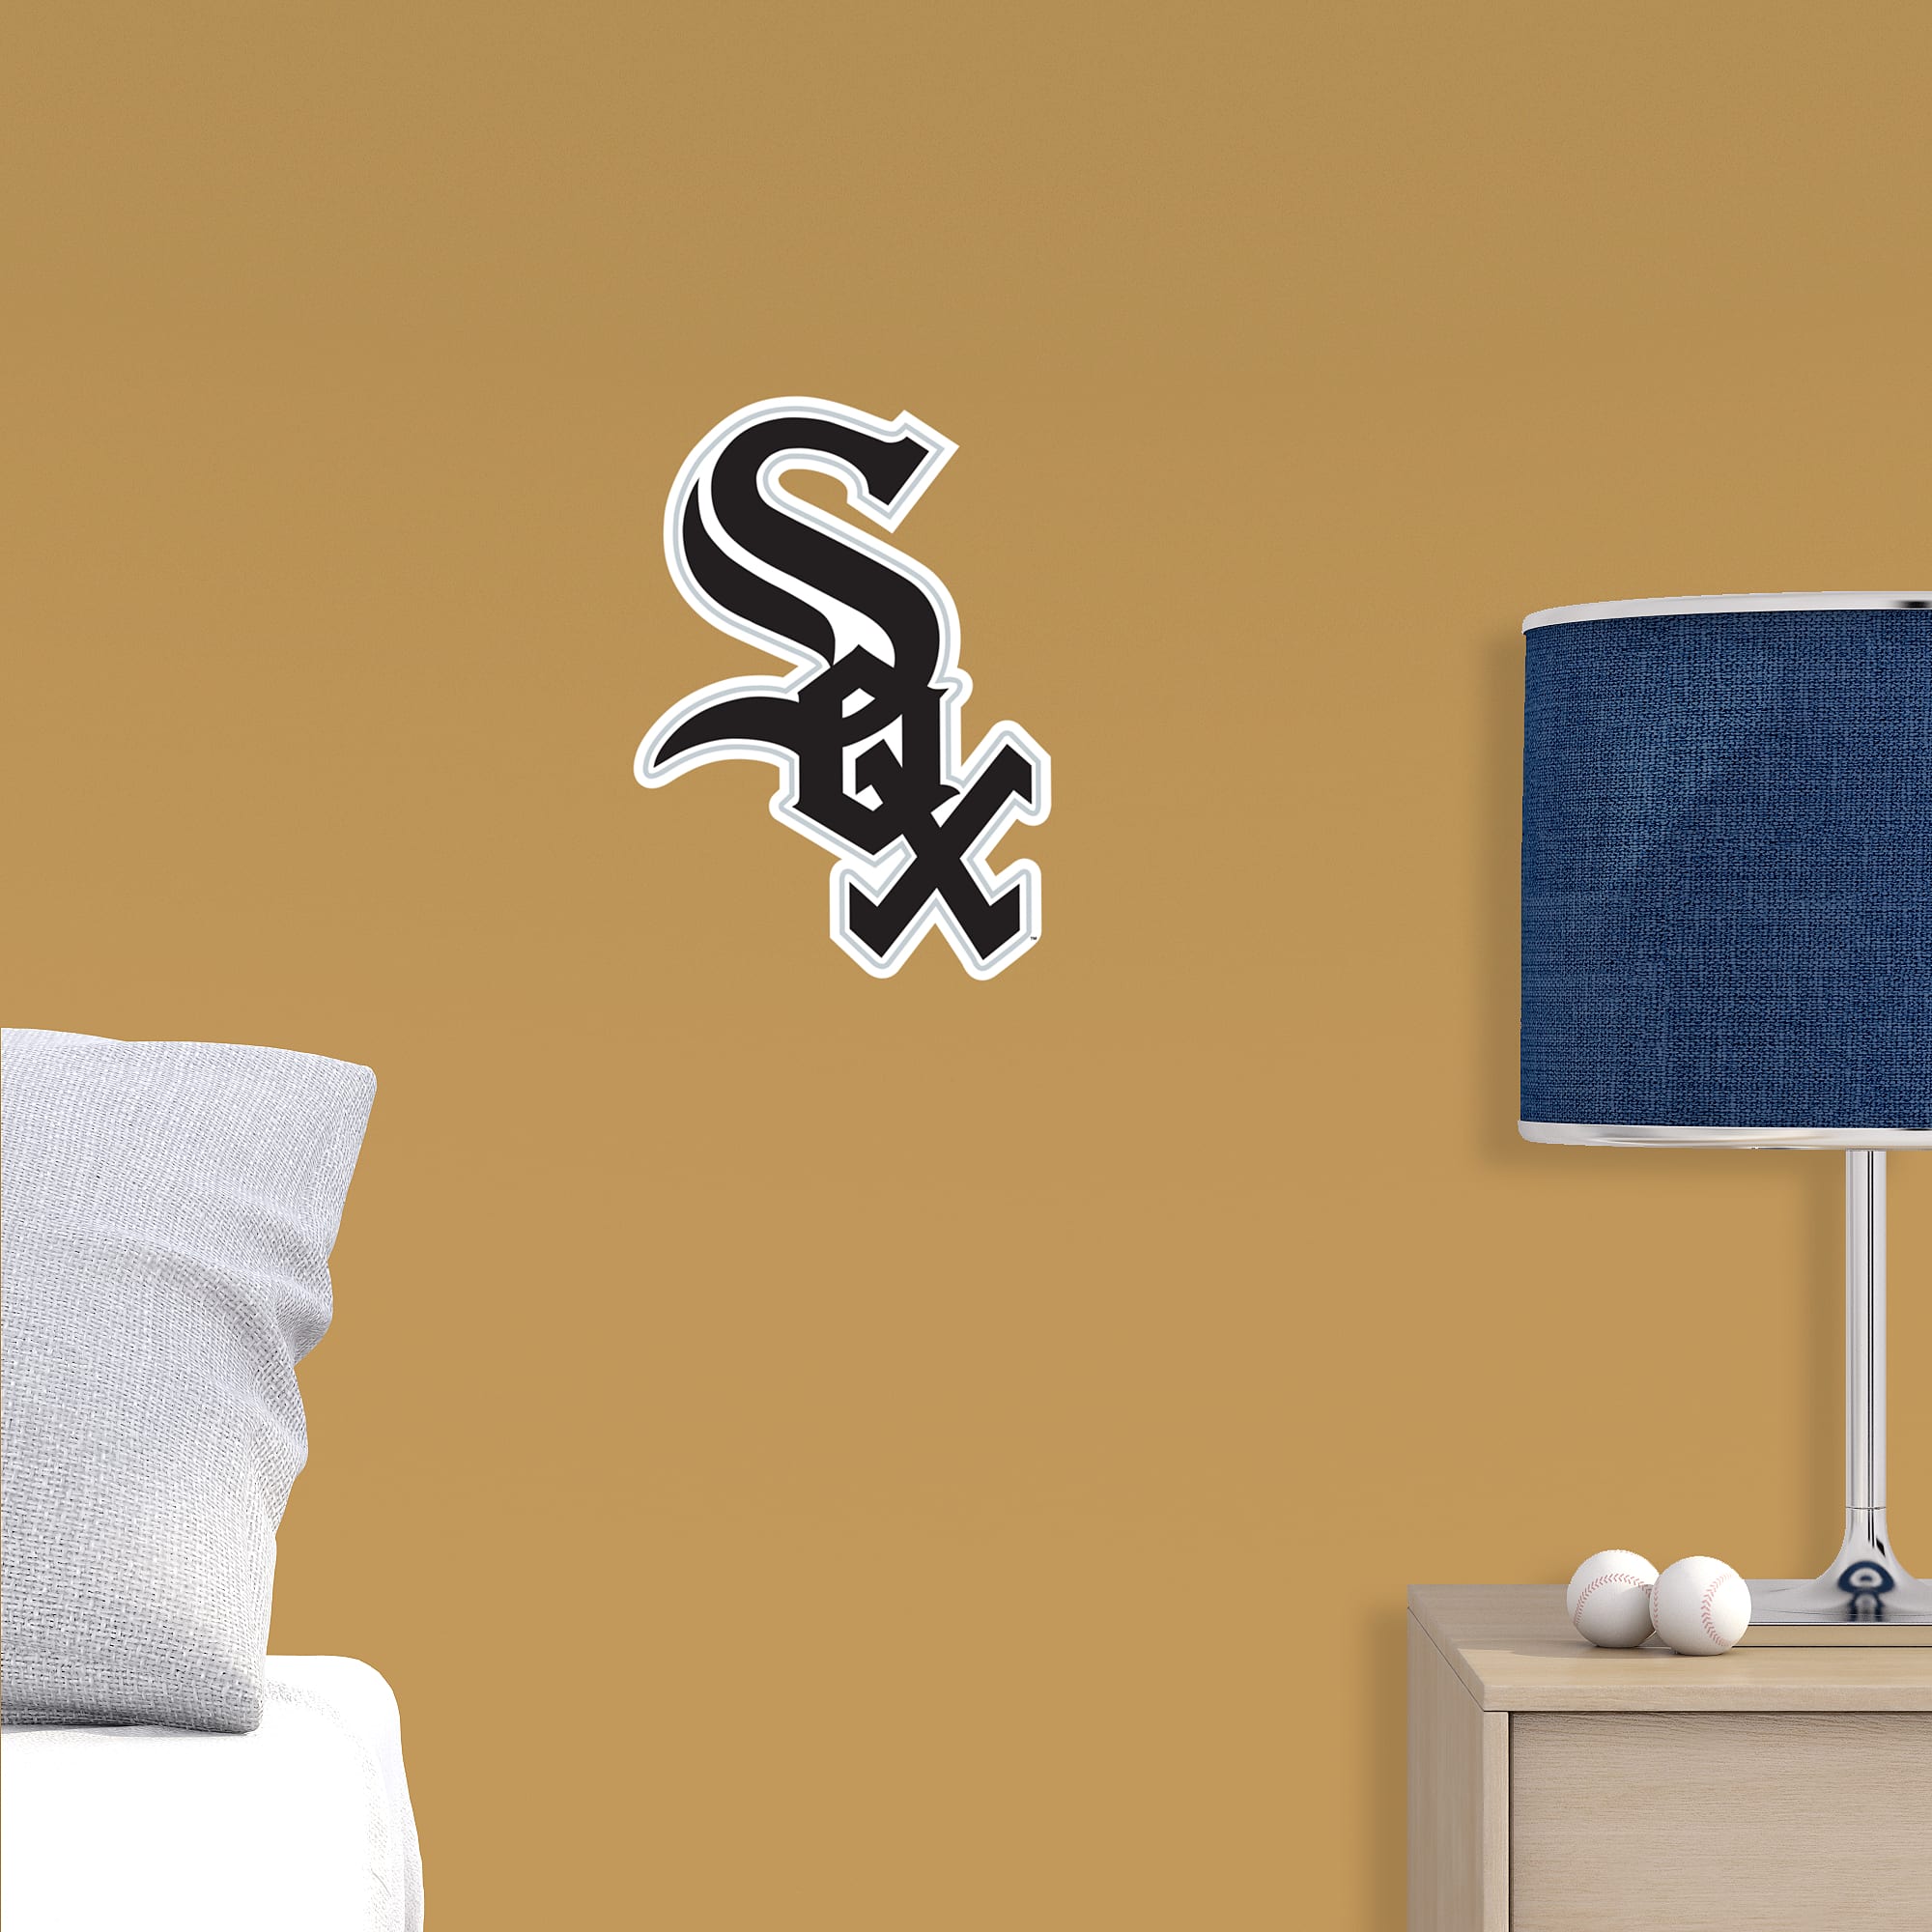 Chicago White Sox: Logo - Officially Licensed MLB Removable Wall Decal Large by Fathead | Vinyl